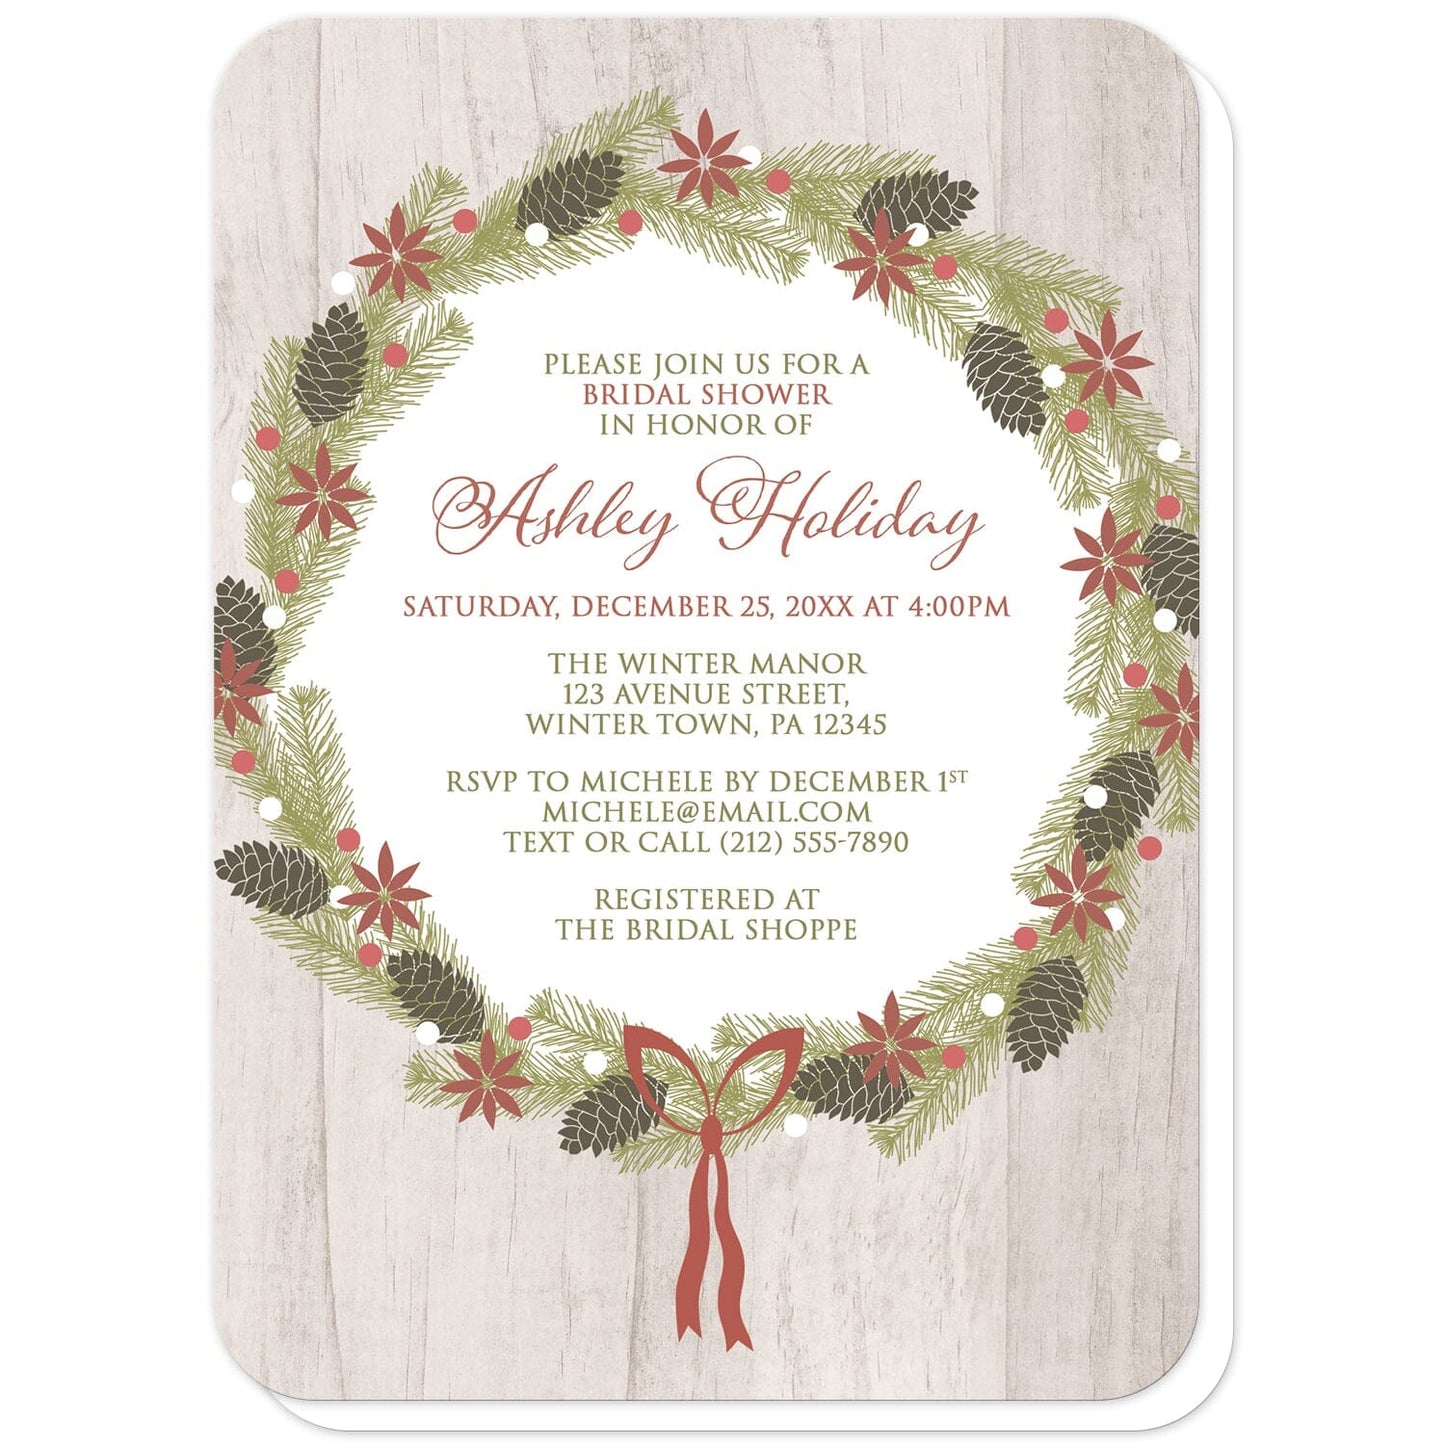 Rustic Poinsettia Pine Cone Wreath Bridal Shower Invitations (with rounded corners) at Artistically Invited. Rustic poinsettia pine cone wreath bridal shower invitations designed with a poinsettia, pine cone, and pine boughs wreath over a light wood background illustration. Your personalized bridal shower celebration details are custom printed in faded red and green over white in the center of this holiday wreath.